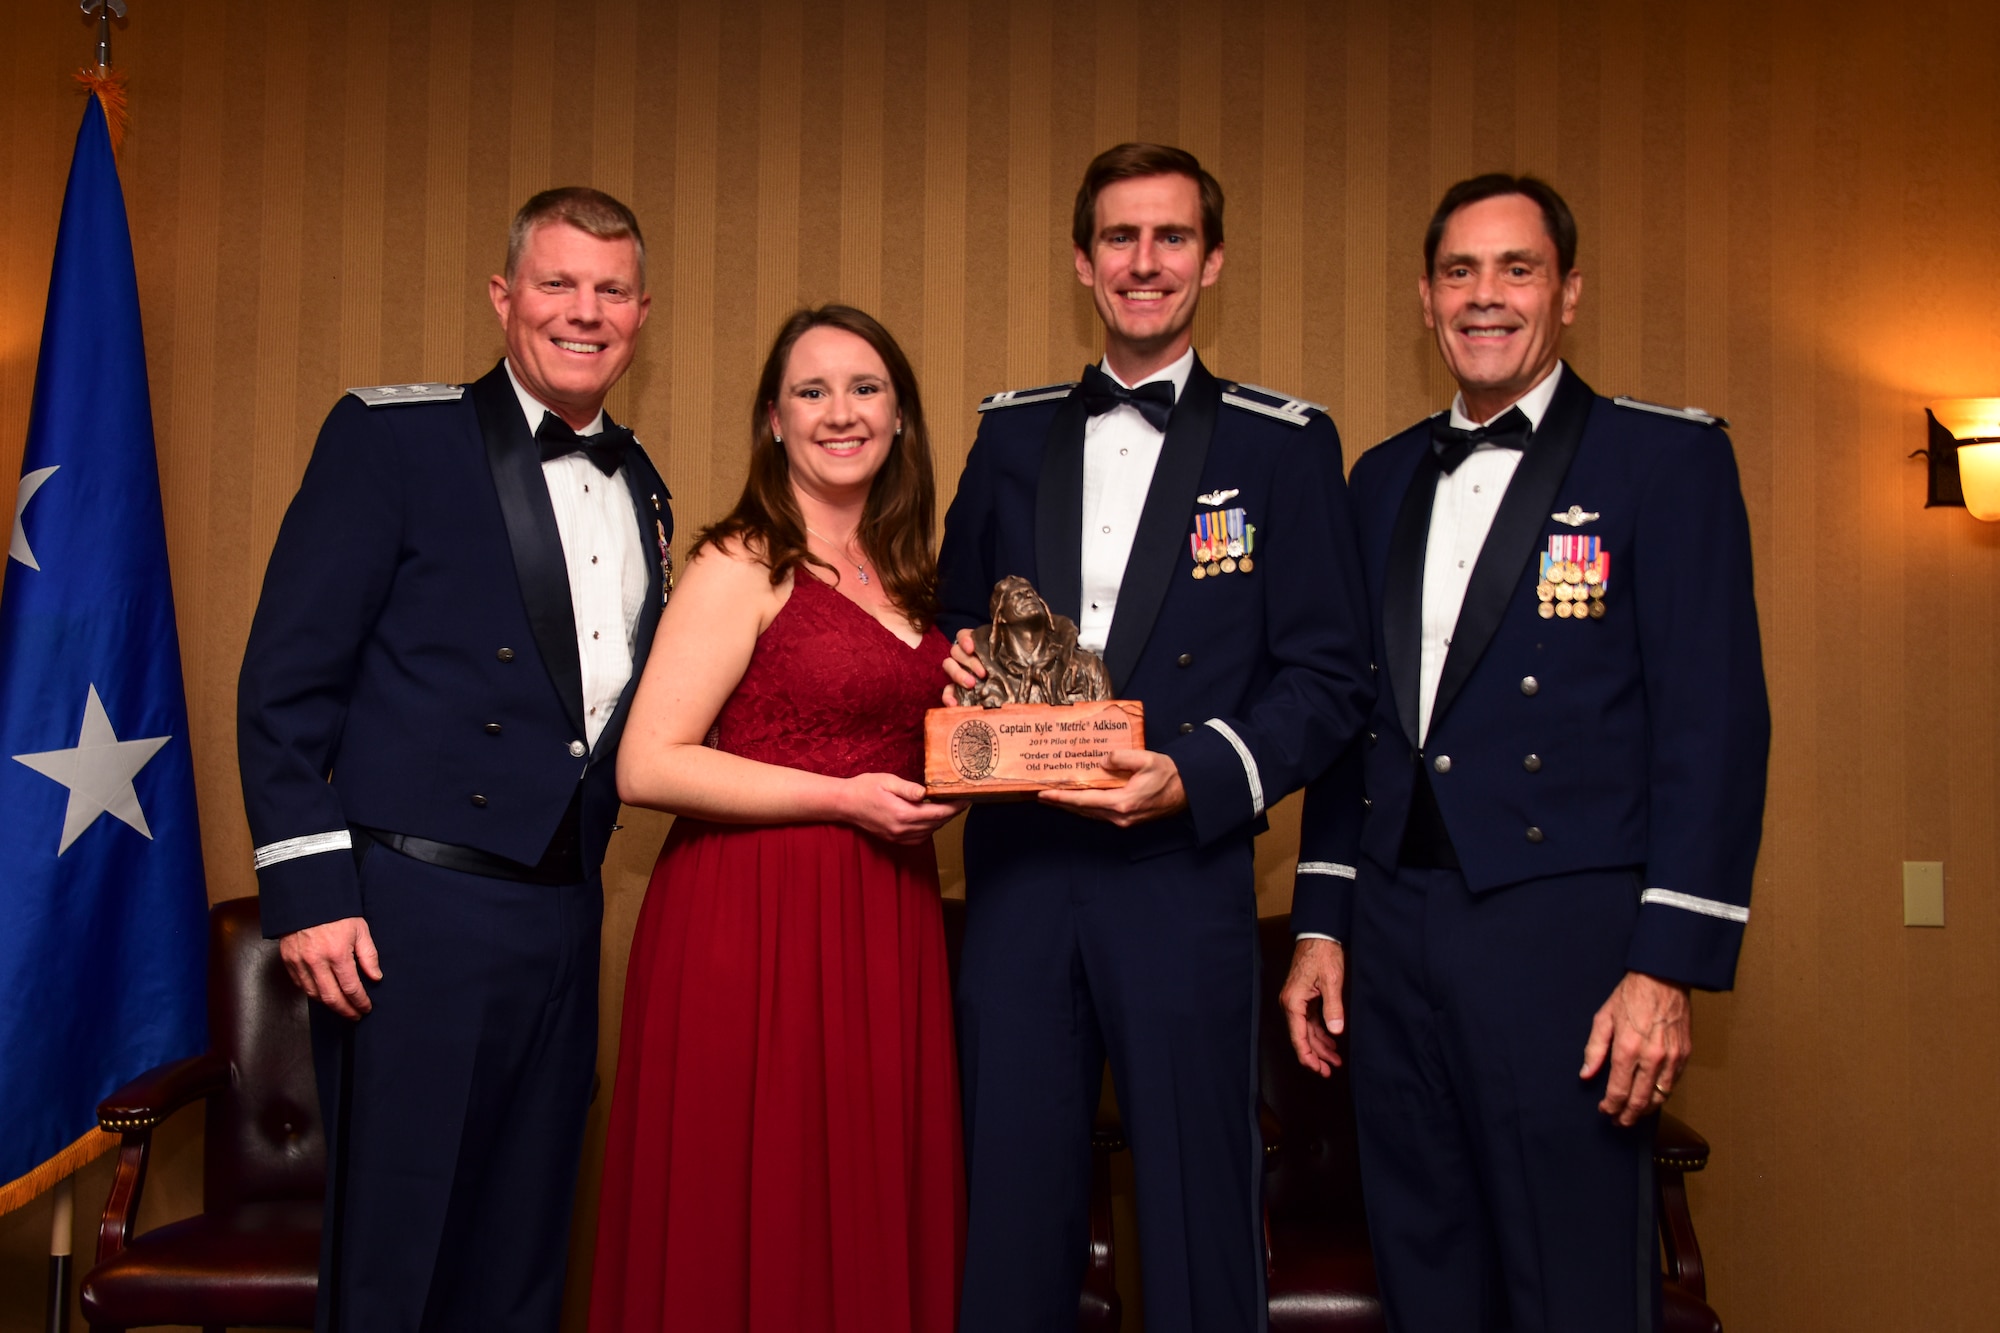 Photo of a U.S. Air Force pilot with his wife, and two other Airmen posing for a group photo with the pilot of the year award